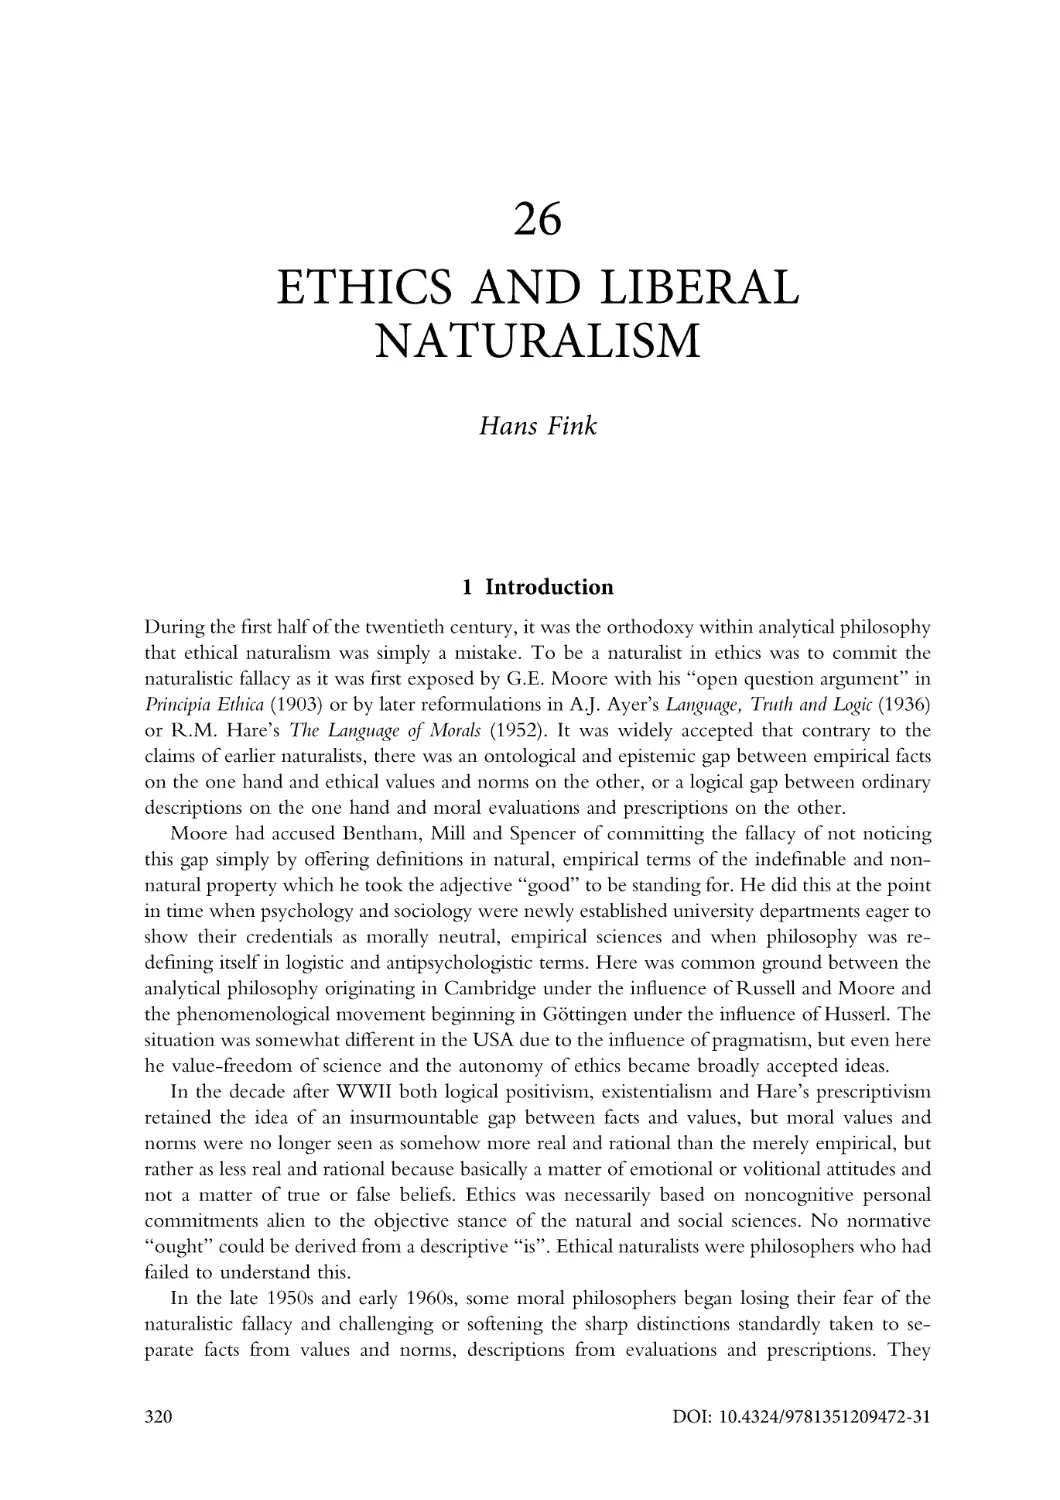 26. Ethics and liberal naturalism
1. Introduction